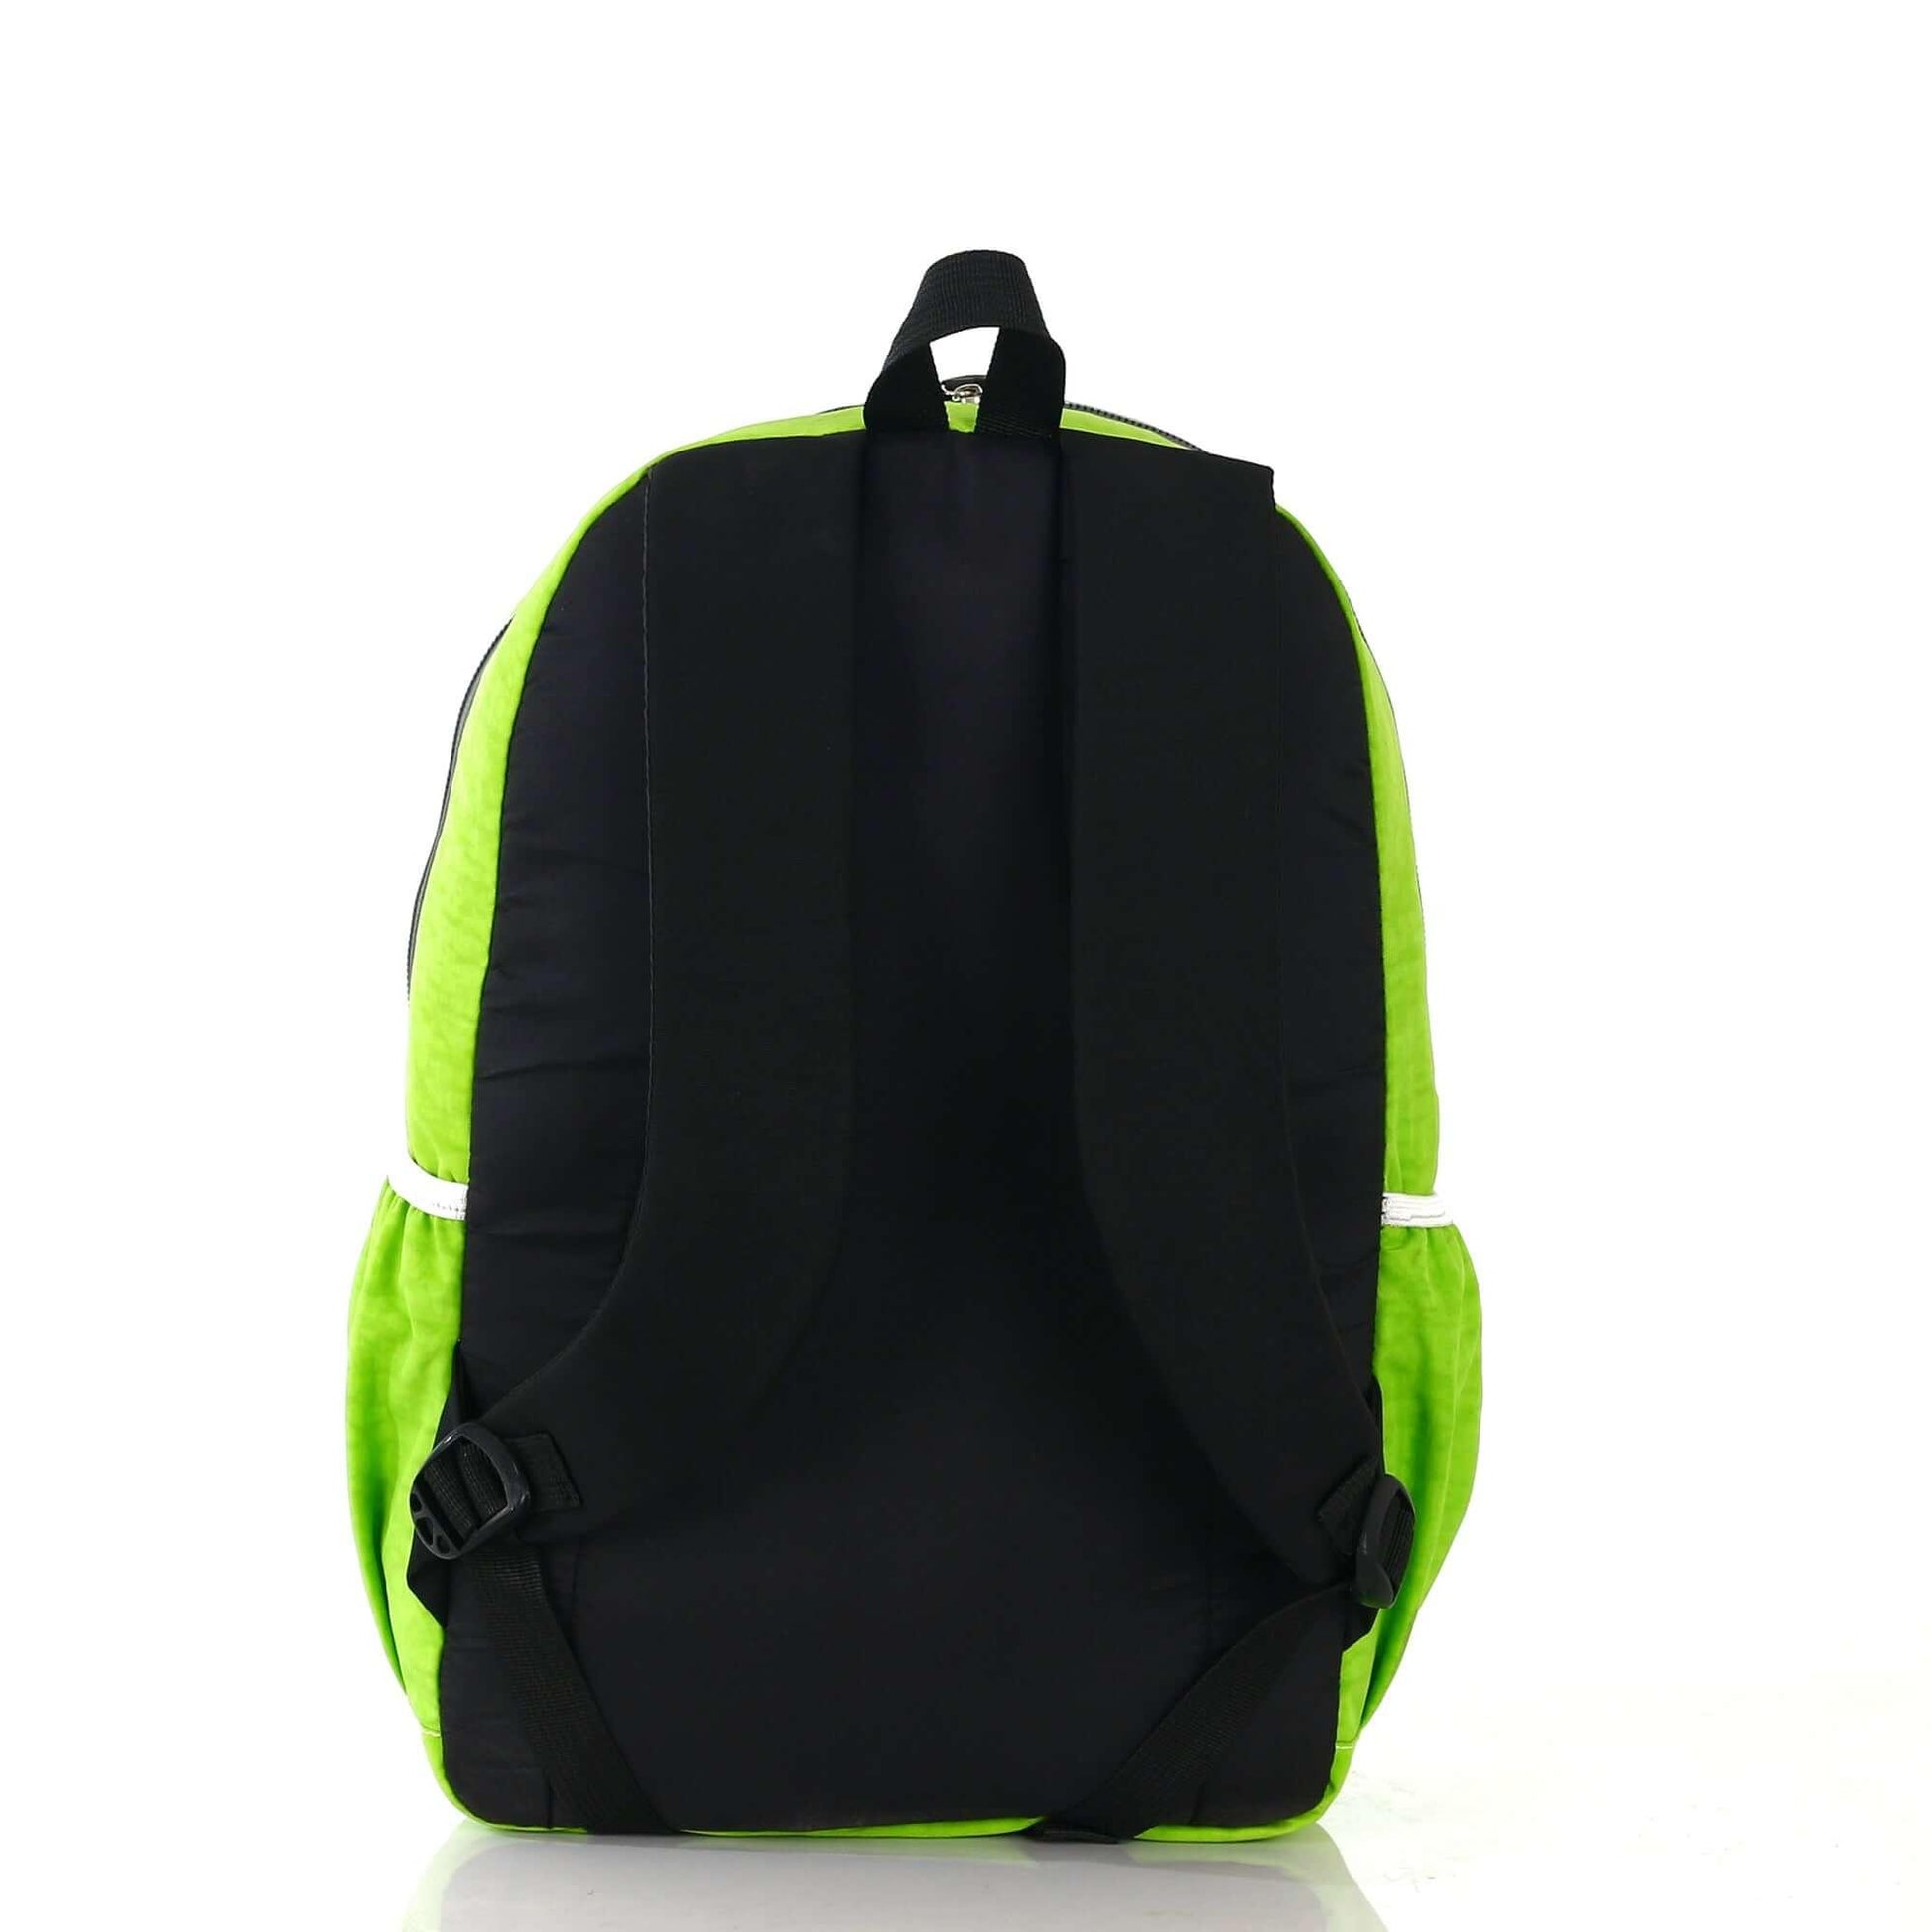 laptop 15.6" Backpack Unisex -Bright green - new edition - FNE-021 - FORCE STORES